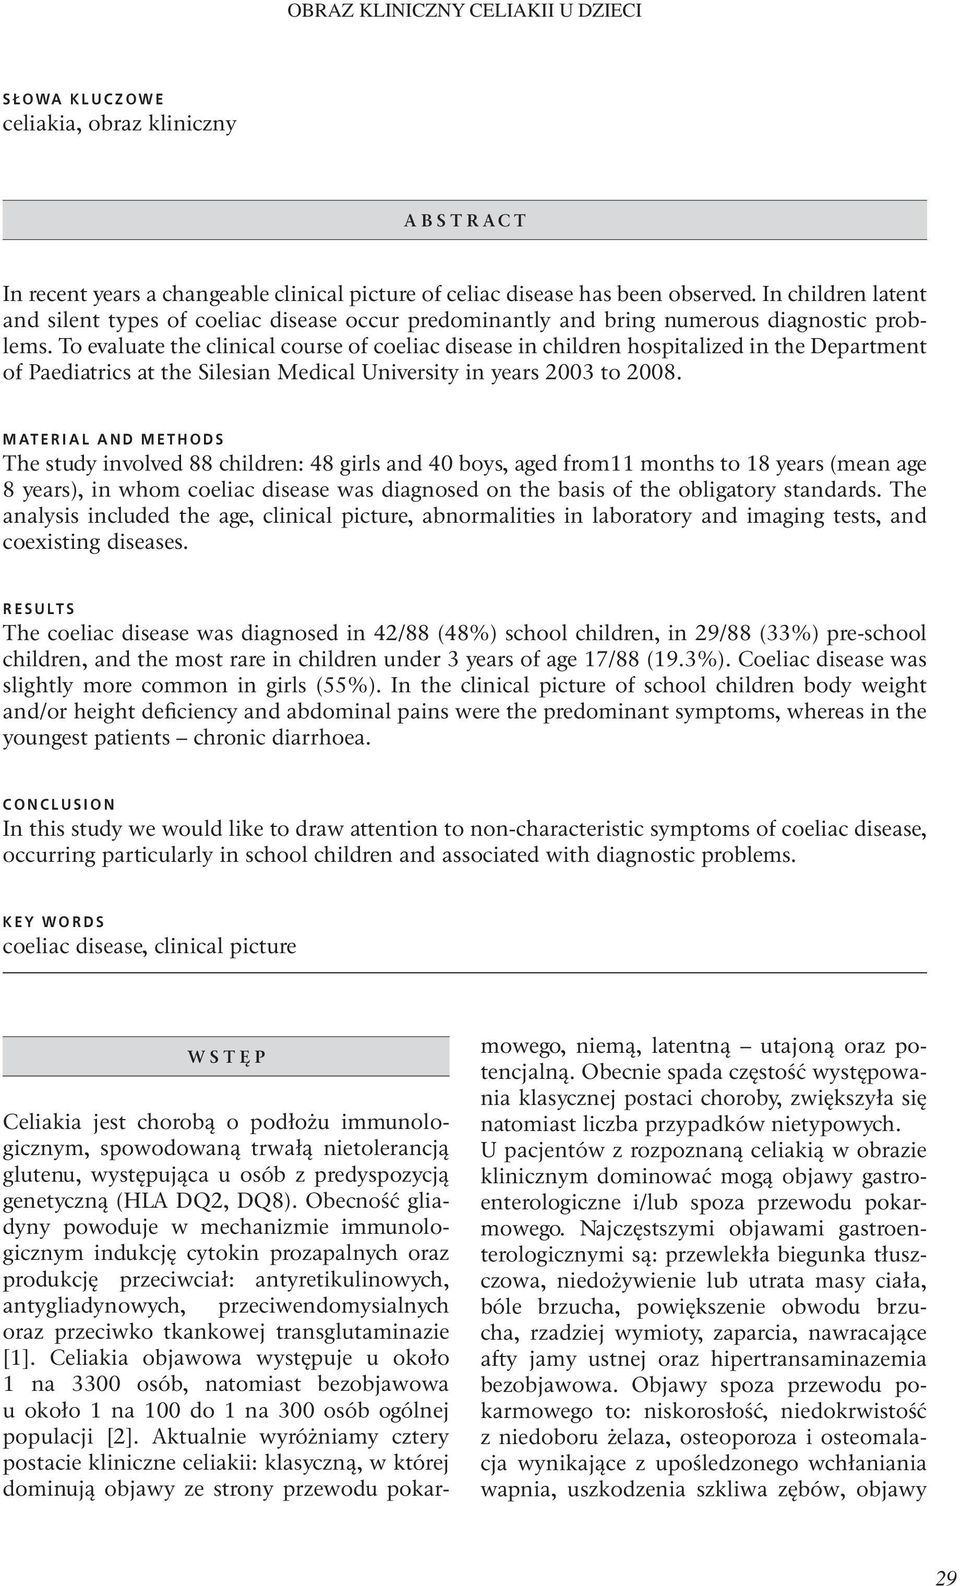 To evaluate the clinical course of coeliac disease in children hospitalized in the Department of Paediatrics at the Silesian Medical University in years 2003 to 2008.